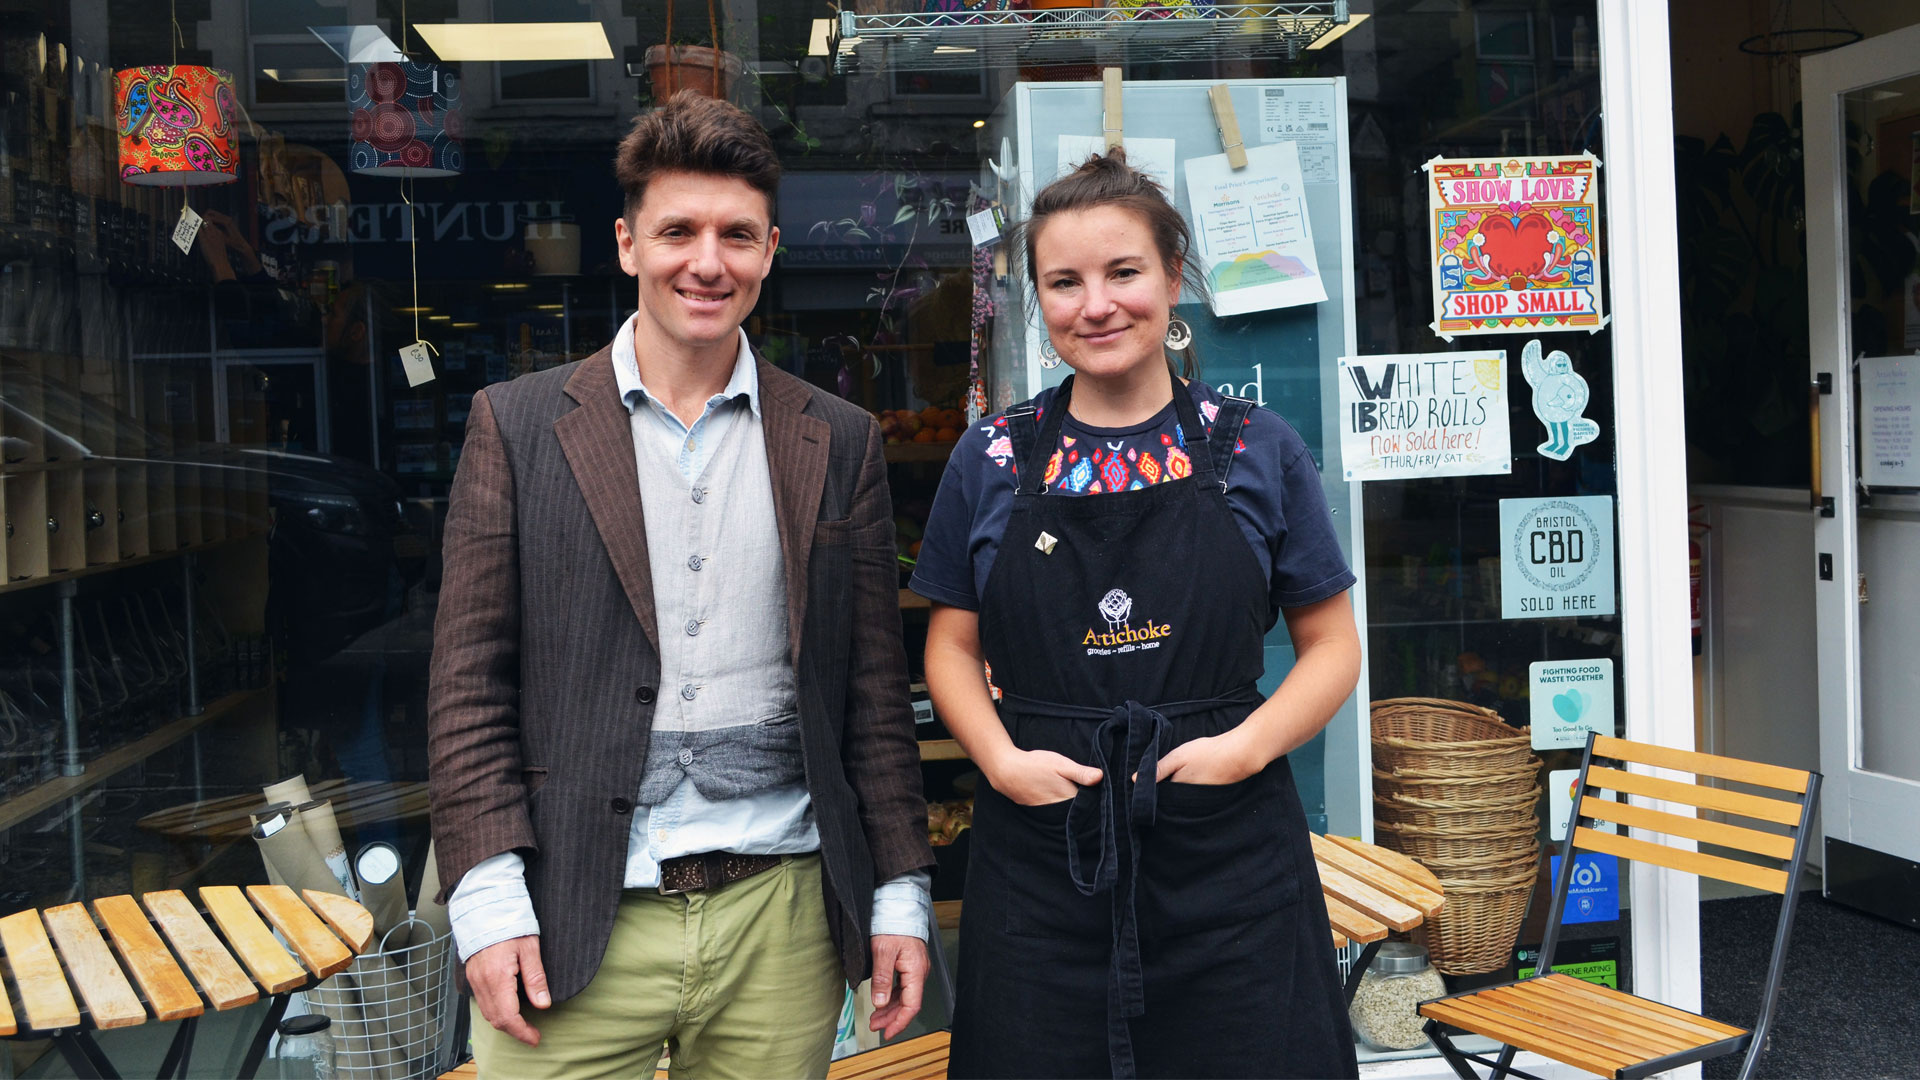 two smiling people, a man and a woman, outside their shop